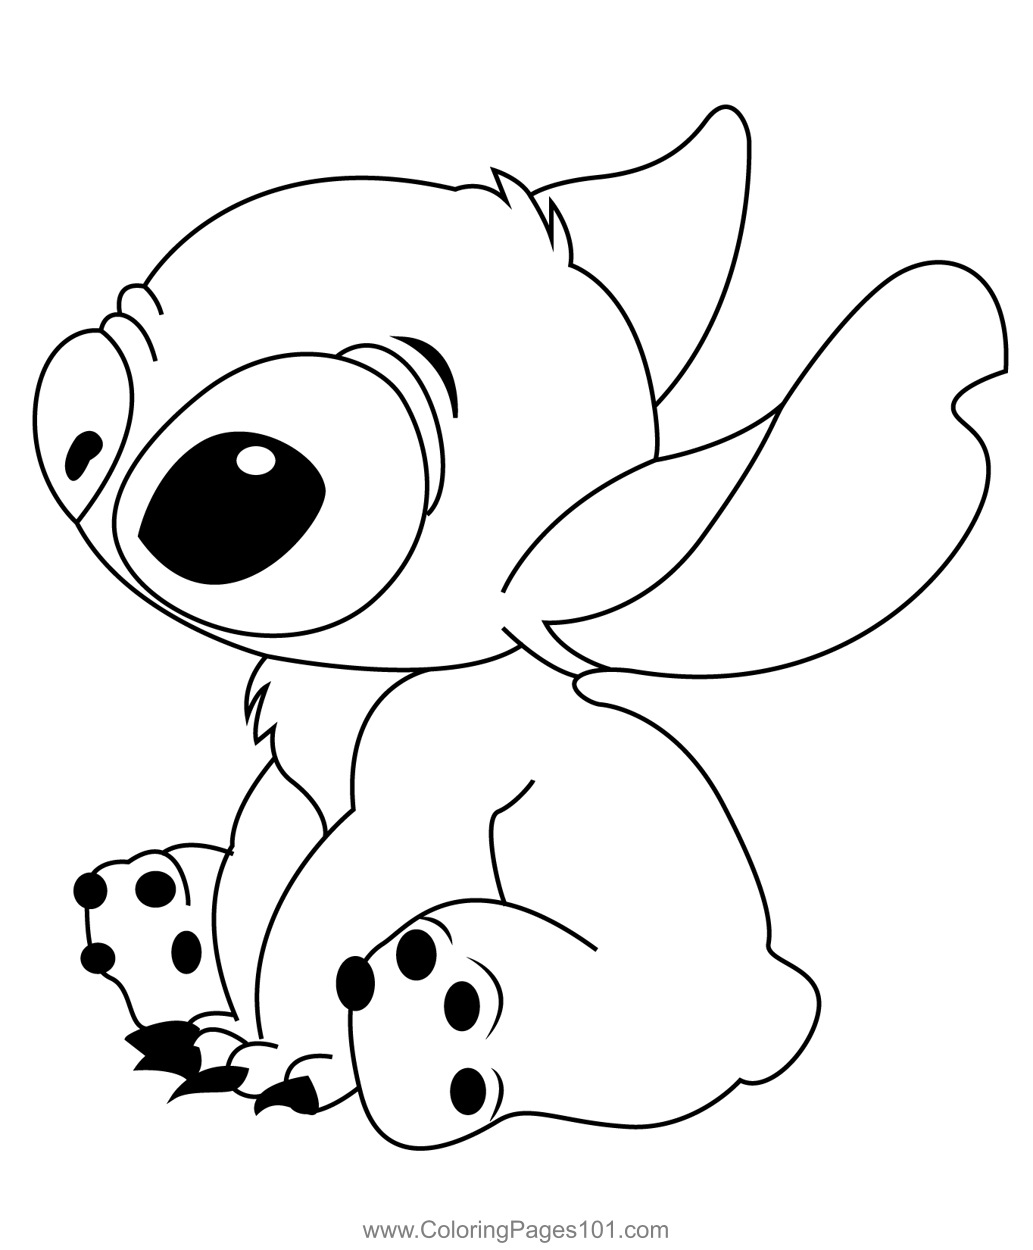 Relax stitch coloring page for kids